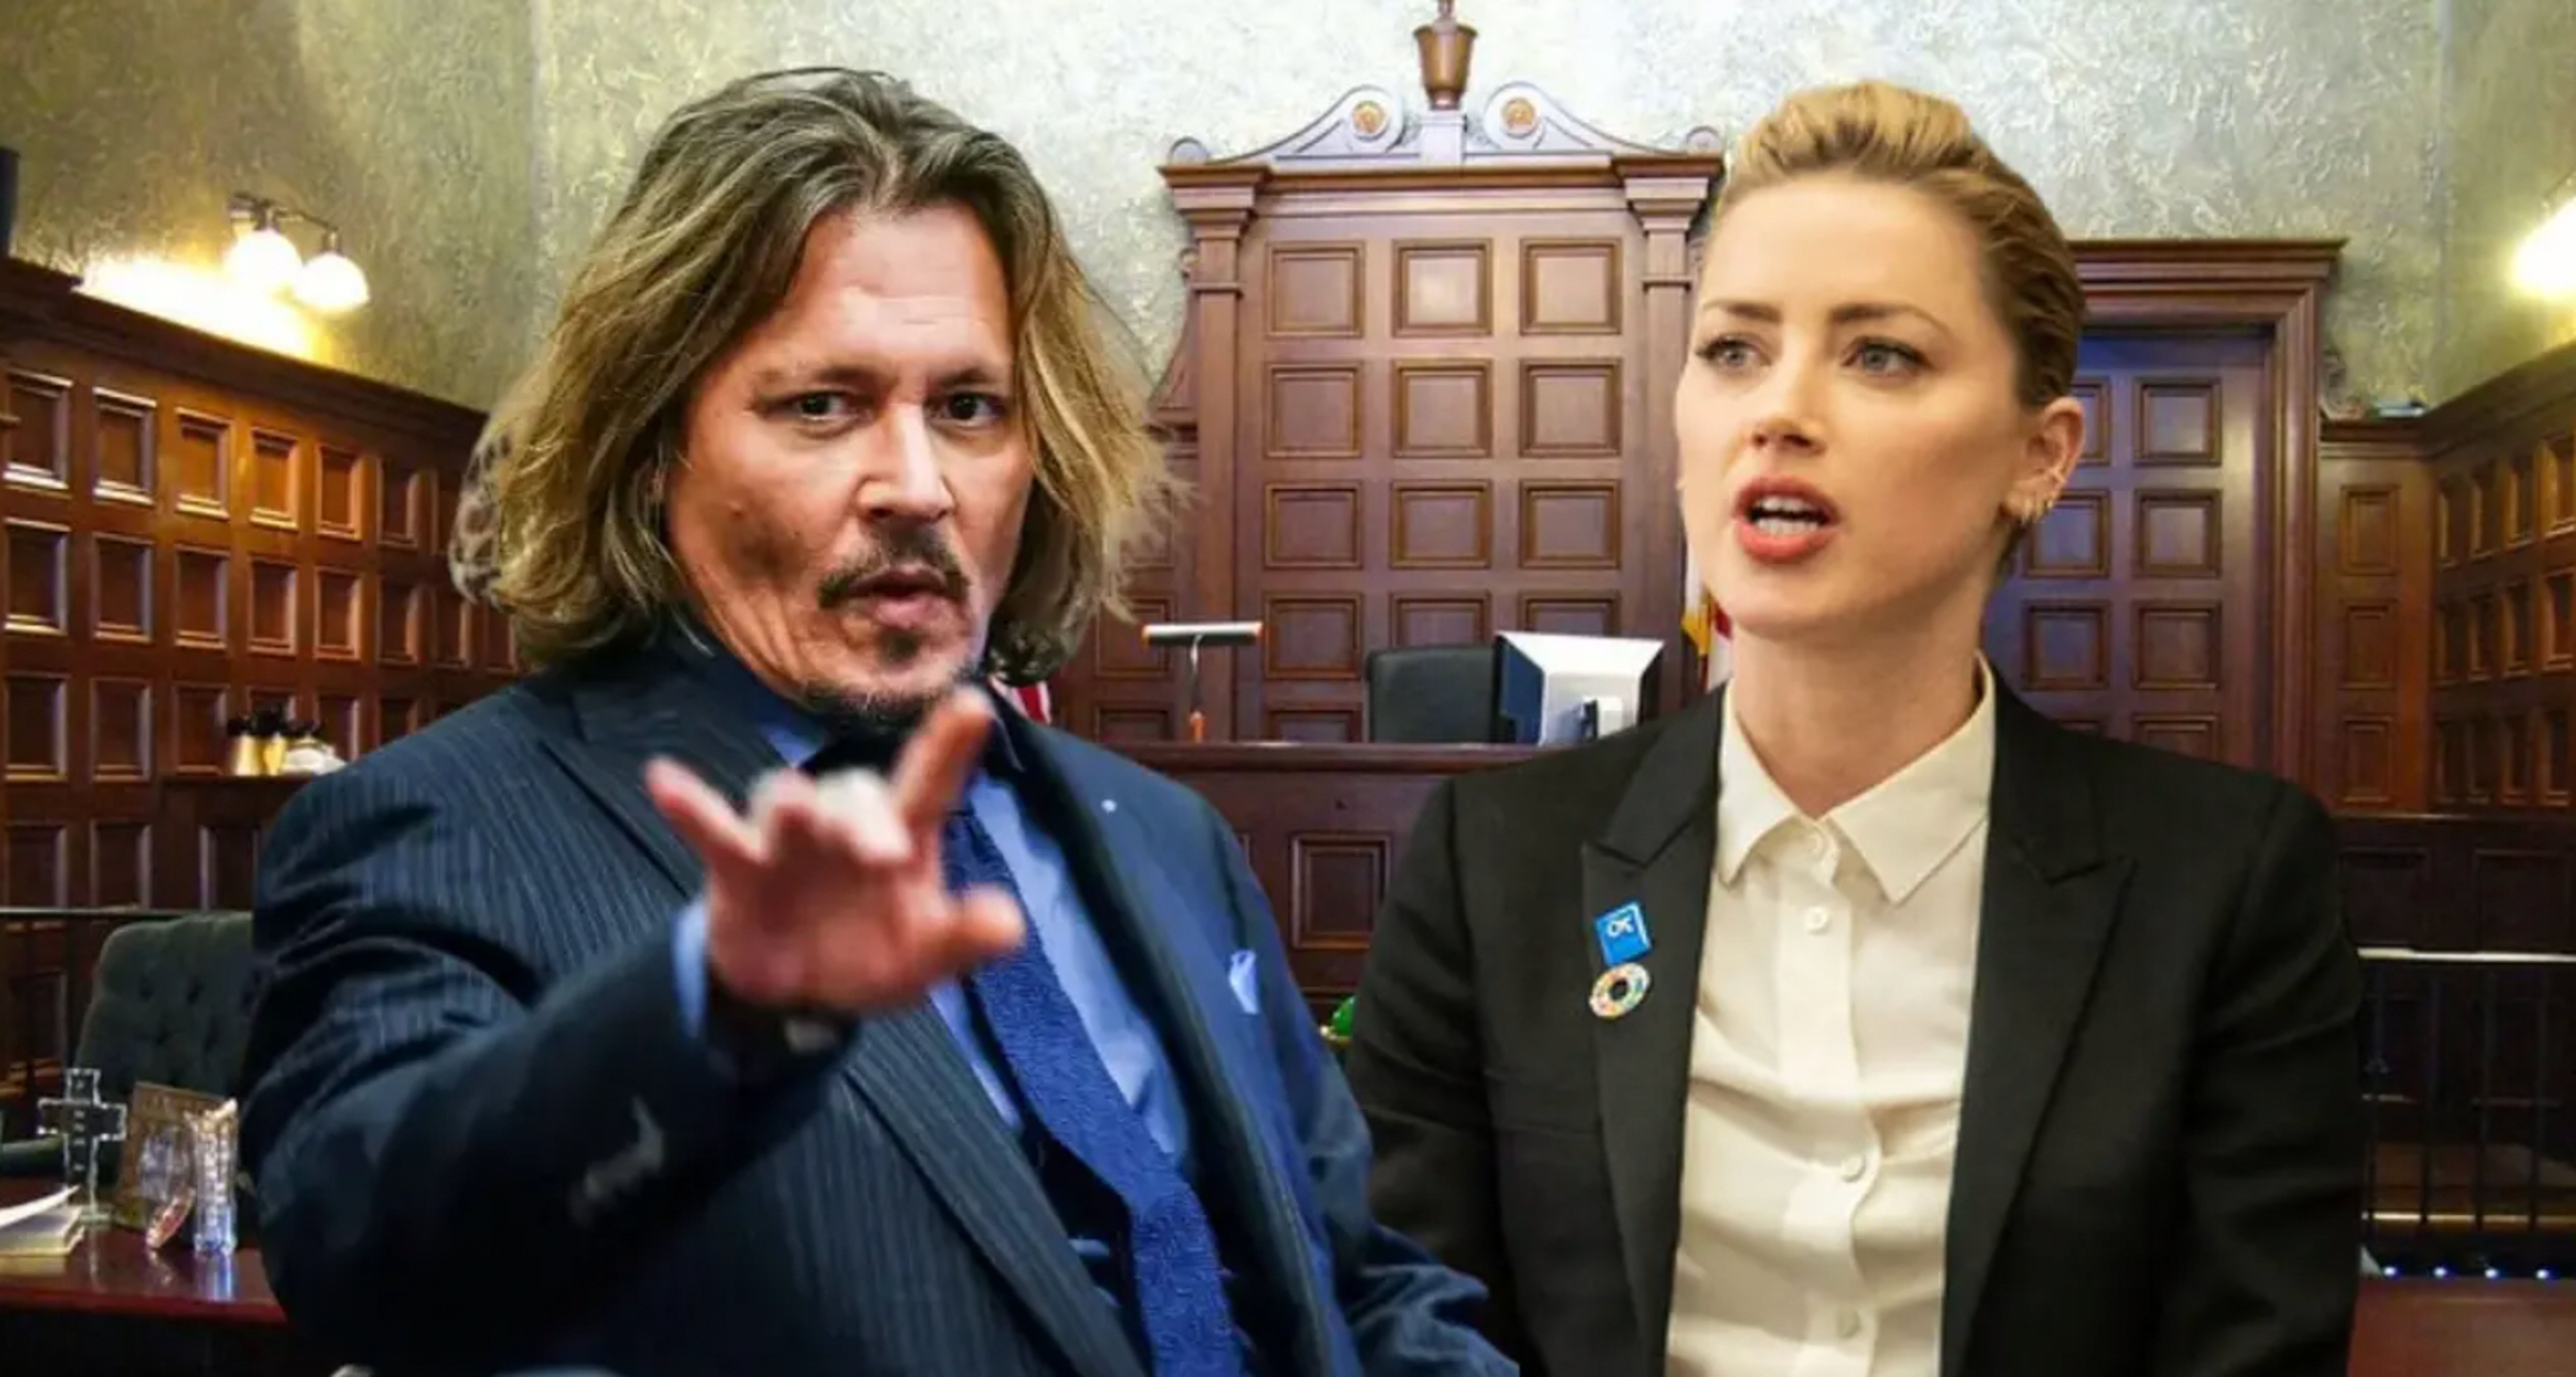 Why Johnny Depp Needs To Pay $38,000 To ACLU After Winning Case Against Ex-Wife Amber Heard